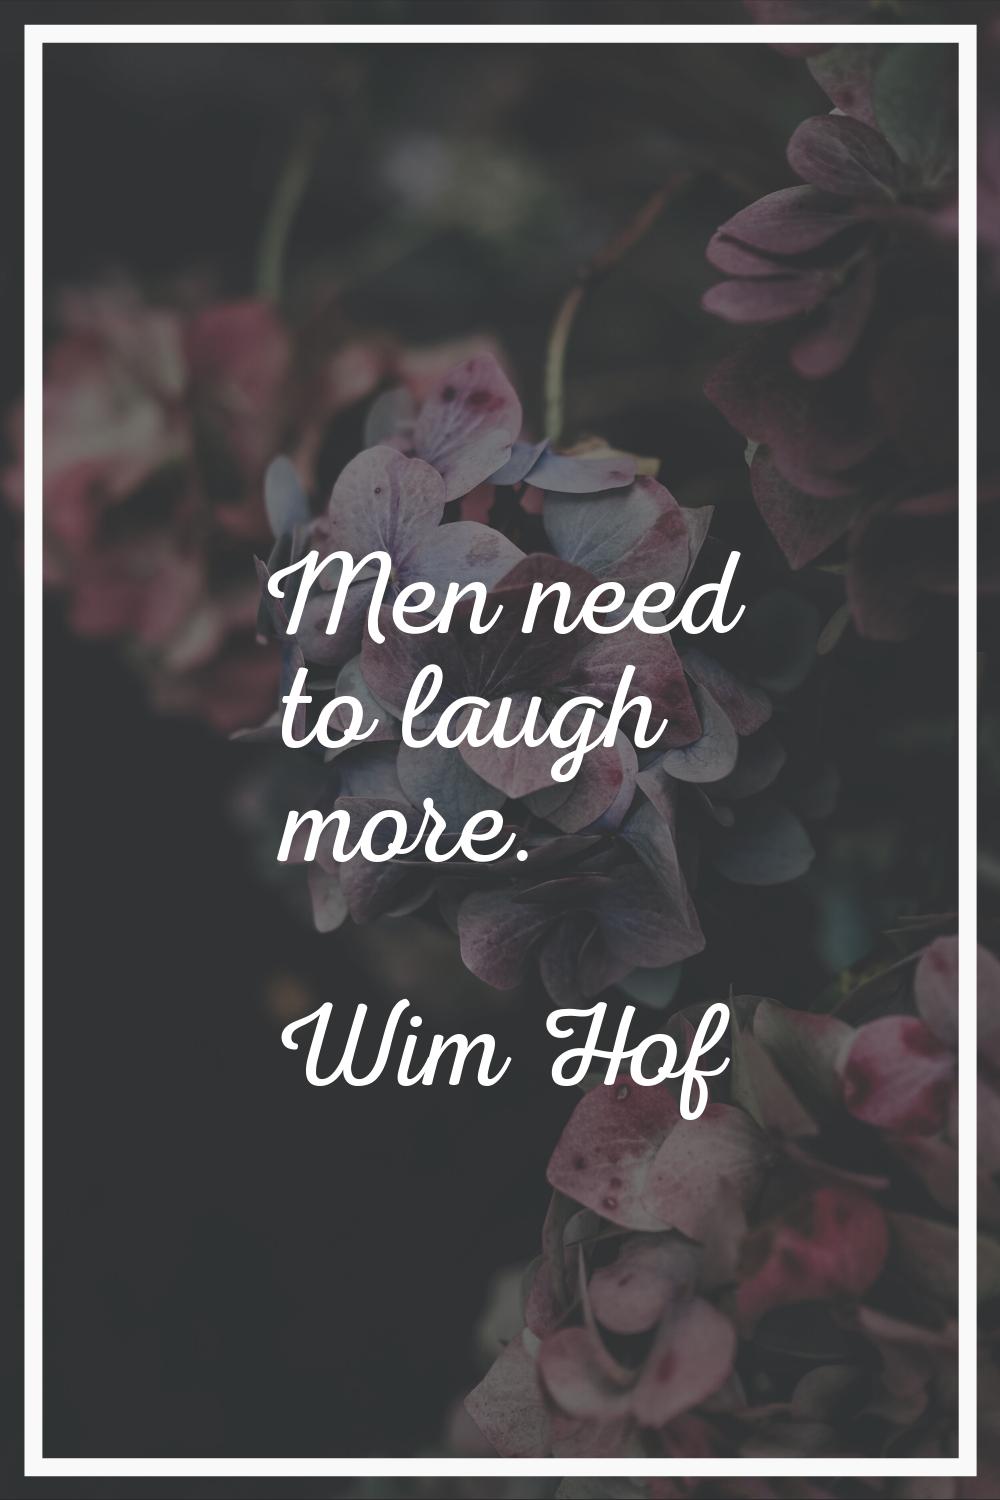 Men need to laugh more.